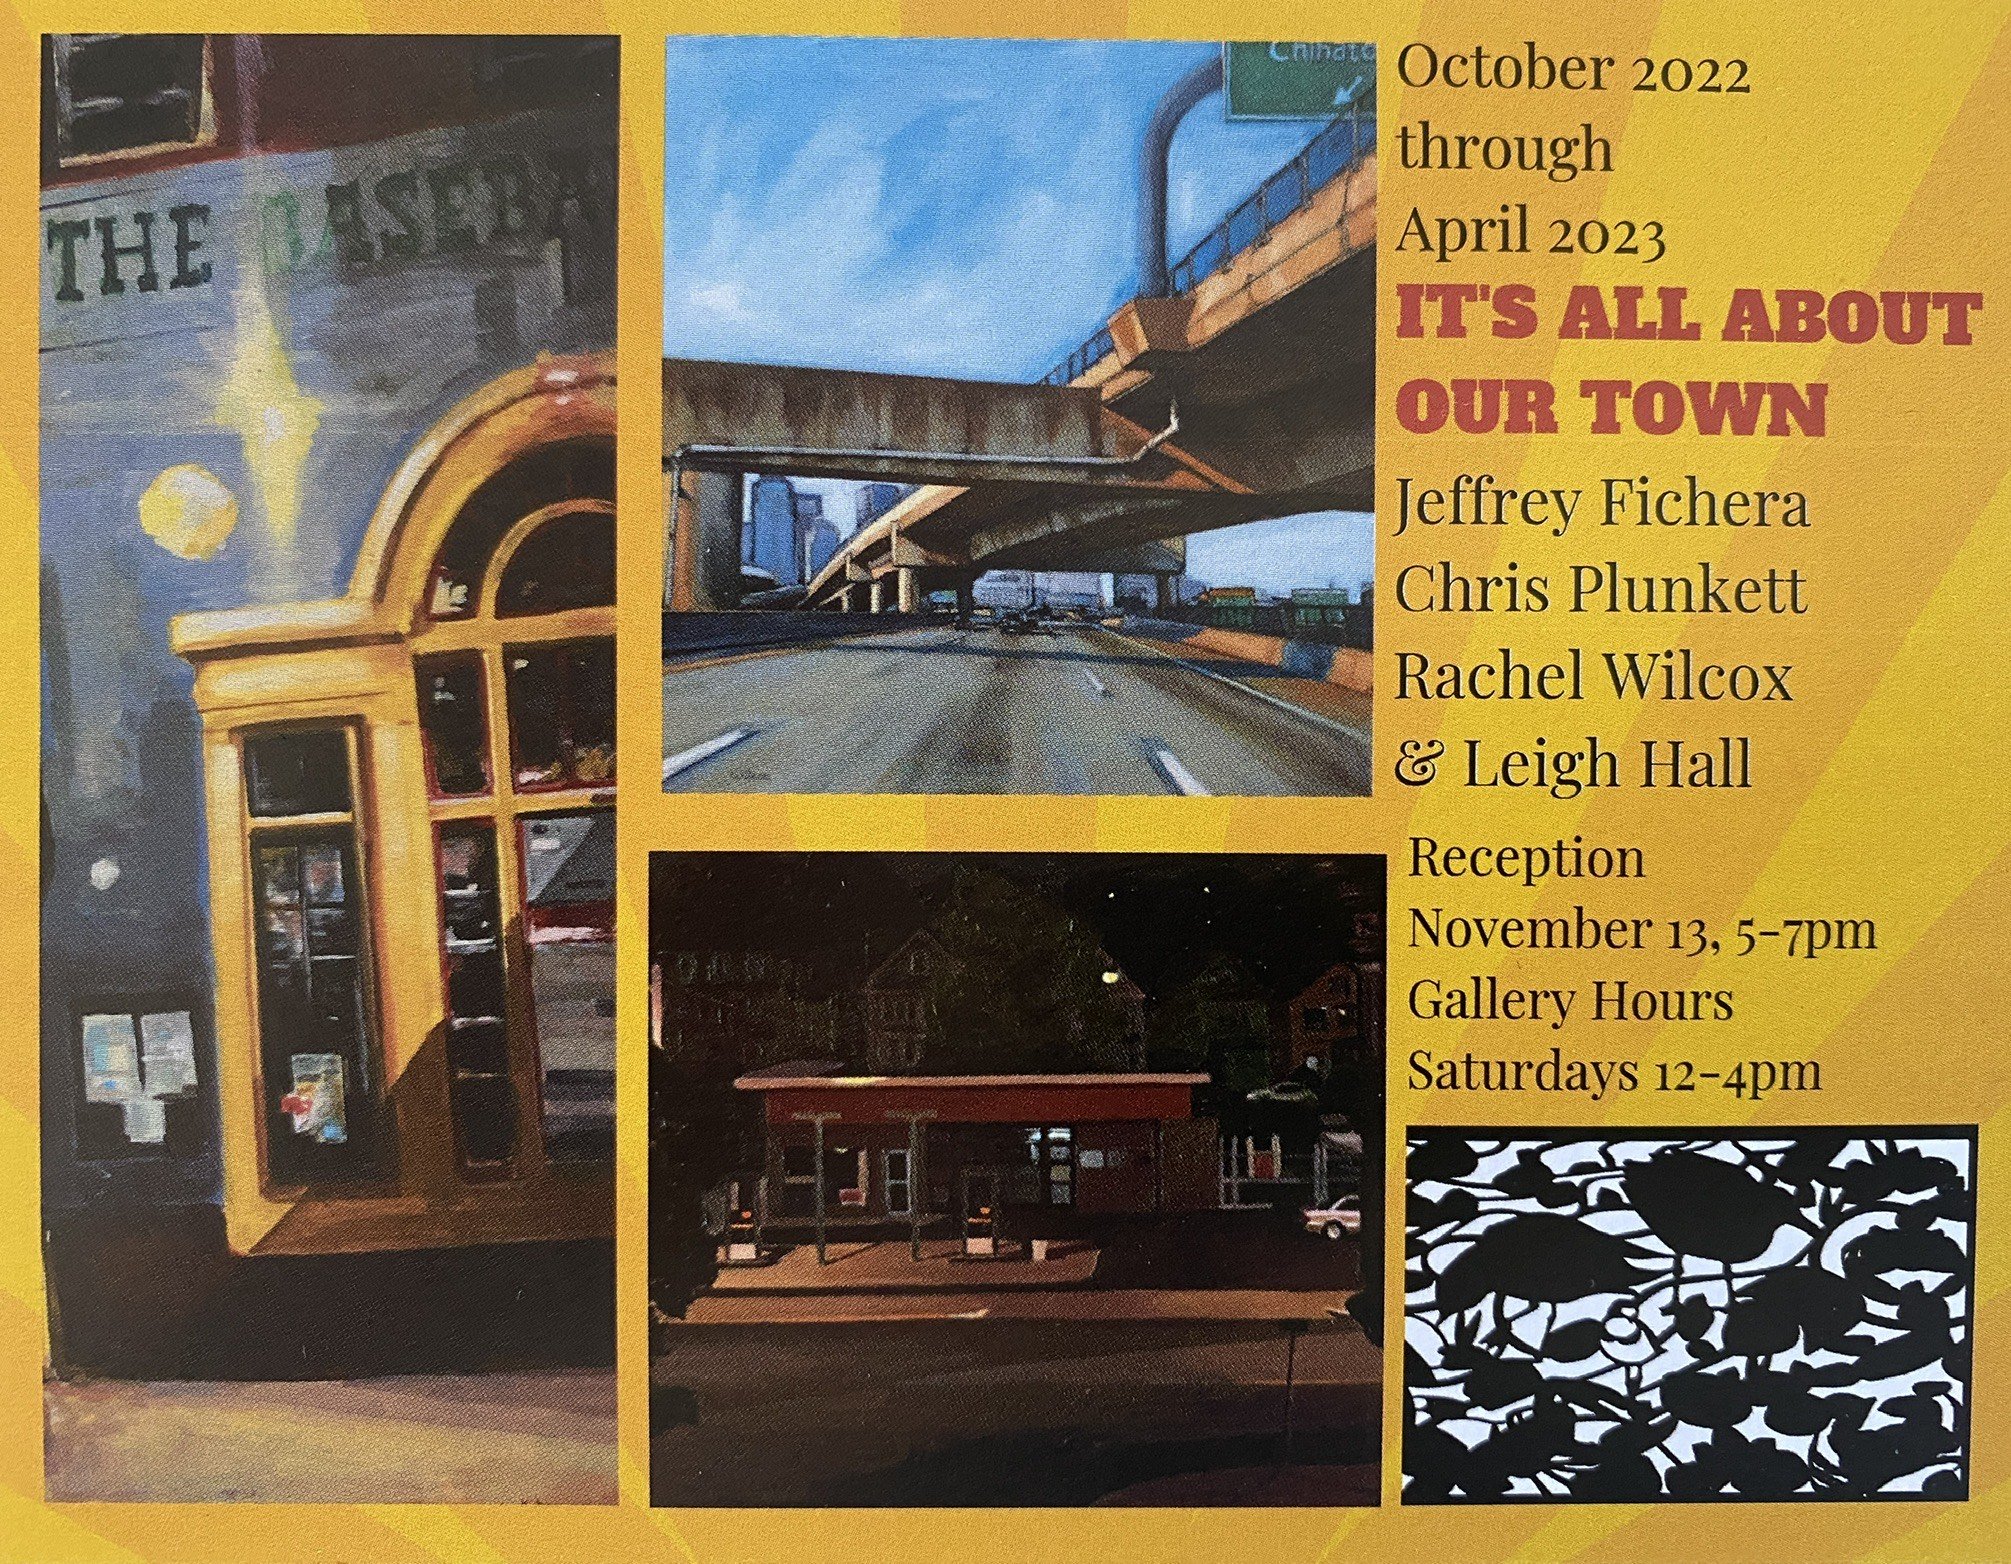  “All About Our Town” postcard, featuring work by Chris Plunkett 